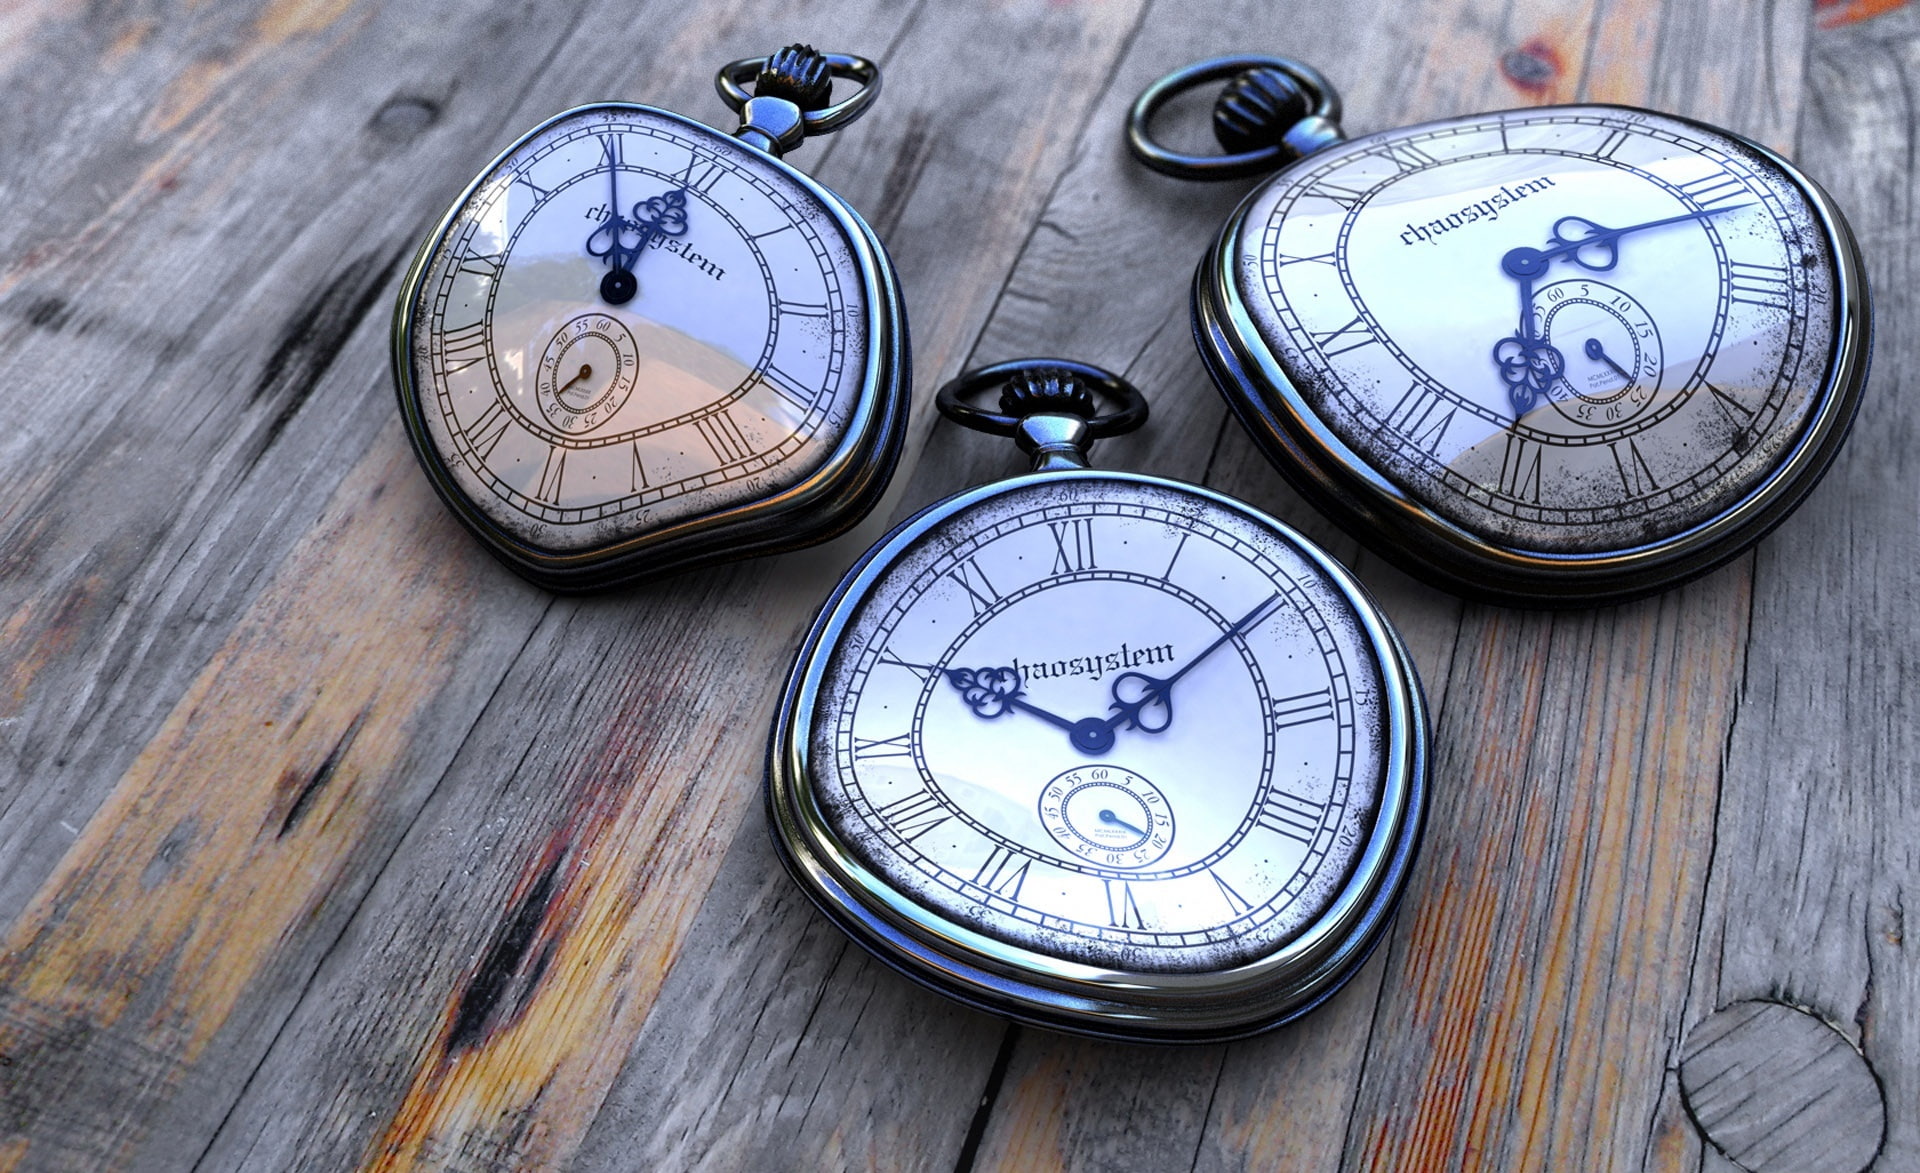 Old Pocket Watches, three silver-colored Salvador Dali watches